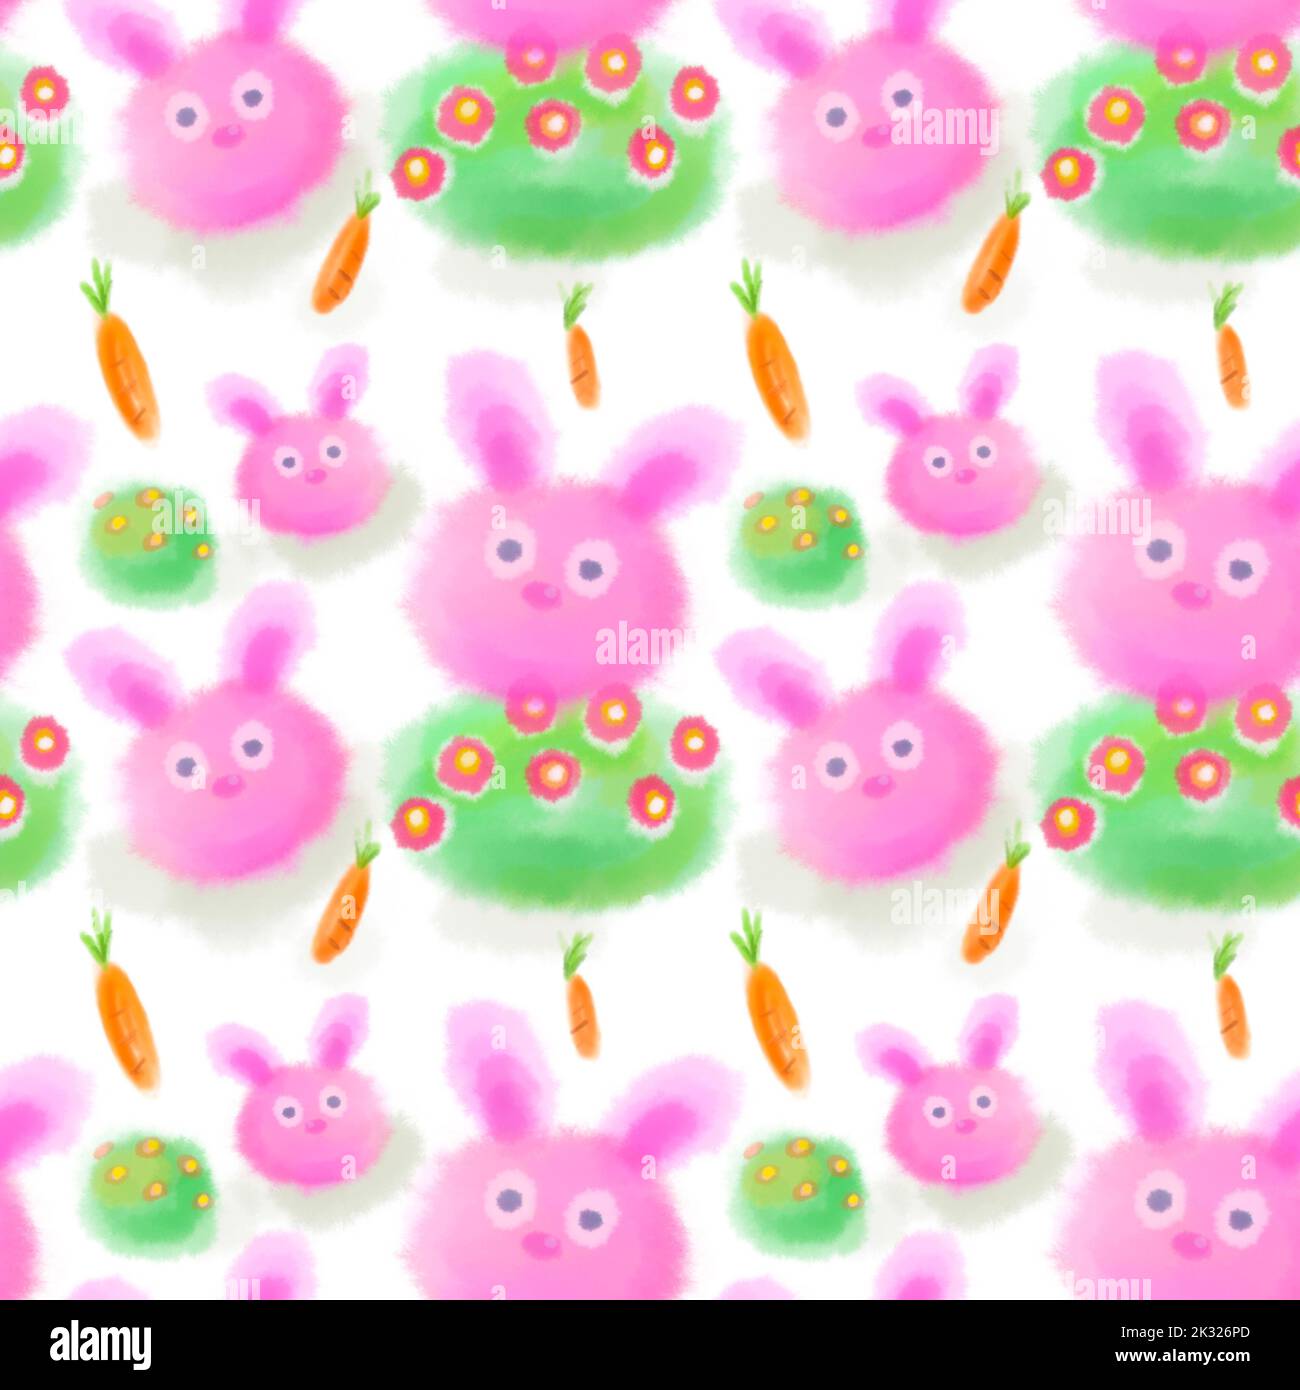 Seamless pattern of fluffy pink rabbits on white background with carrots, hand-drawn cute pink fluffy rabbits, green bush or shrub with flowers. Stock Photo